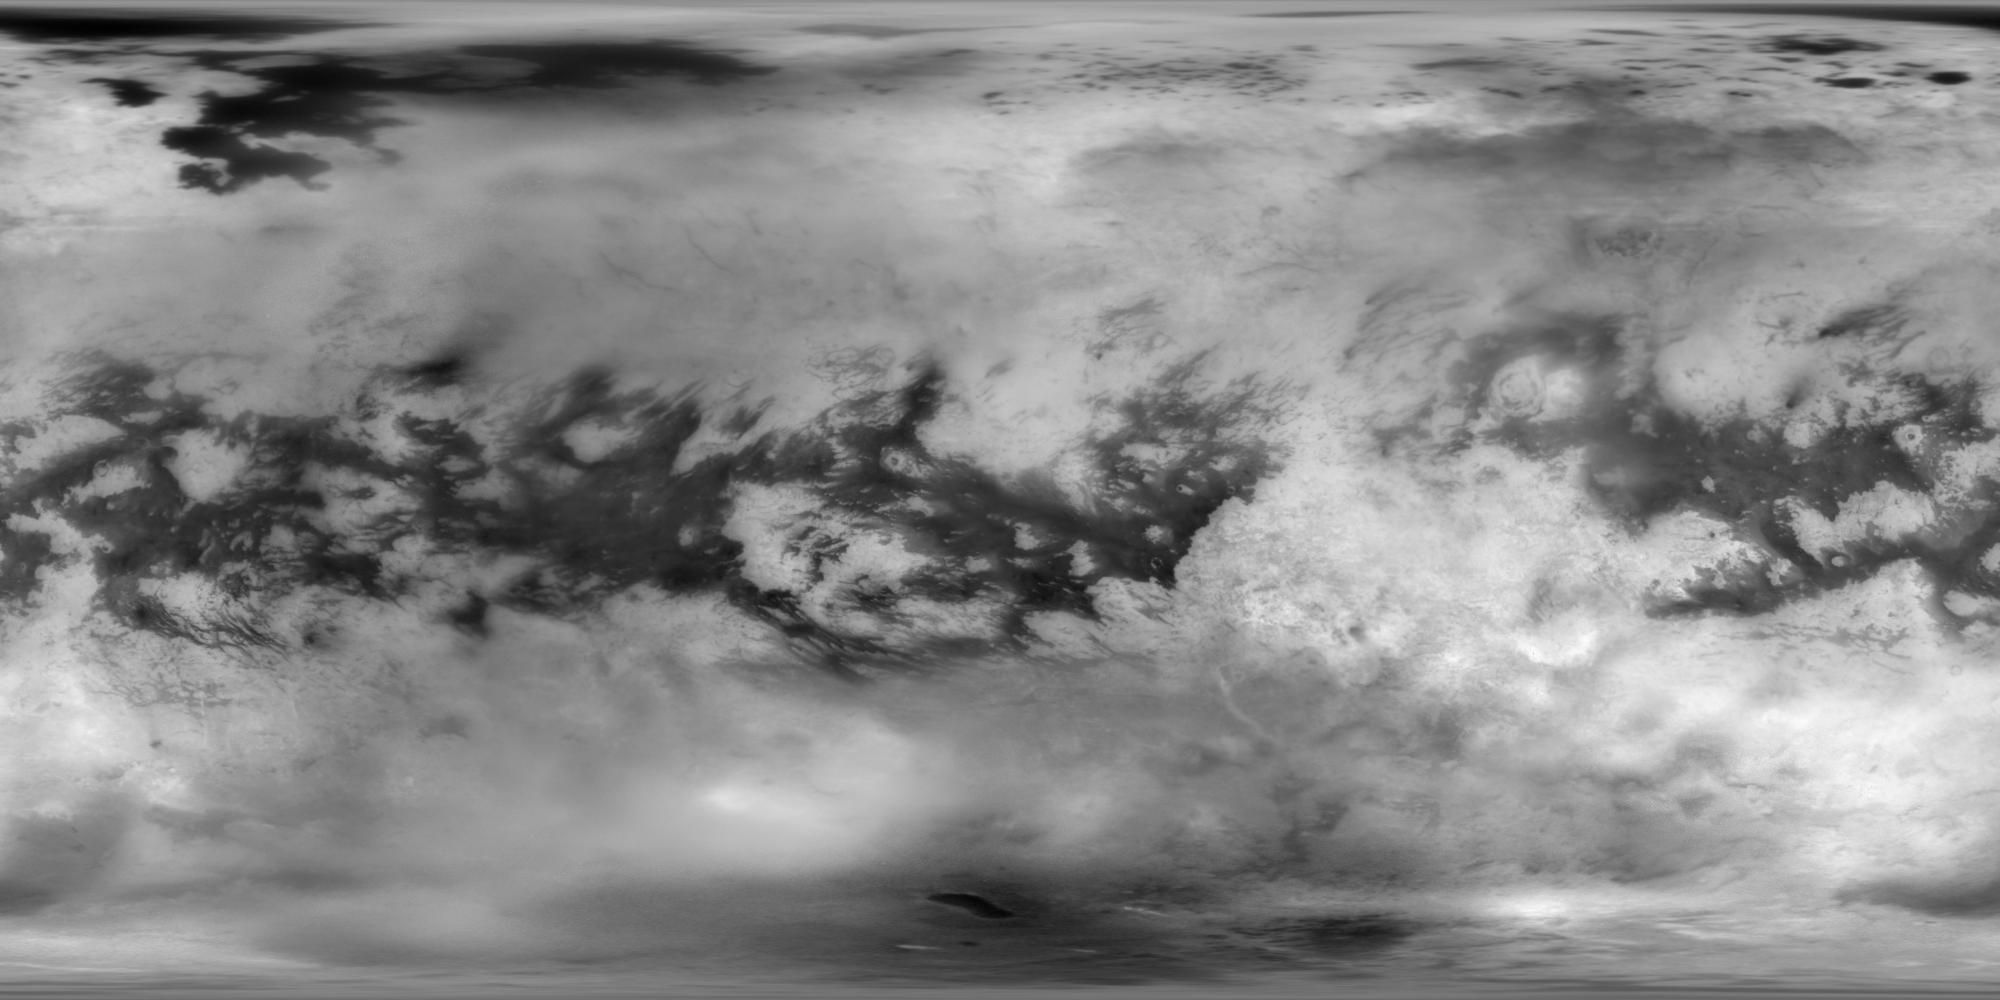 Global black and white view of Titan's surface.